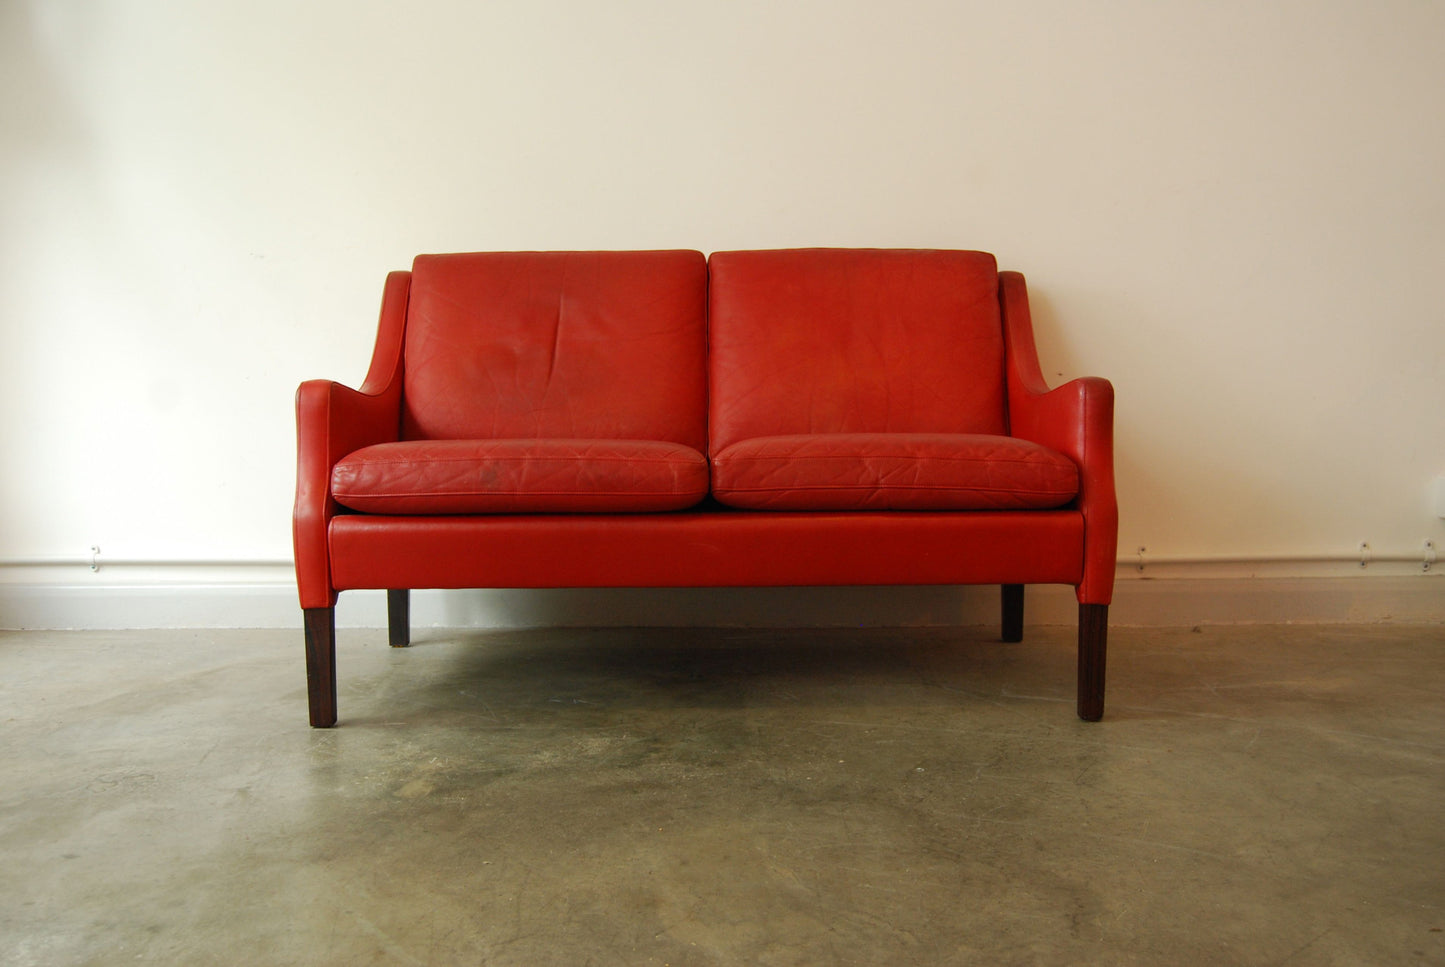 Two seat sofa in red leather